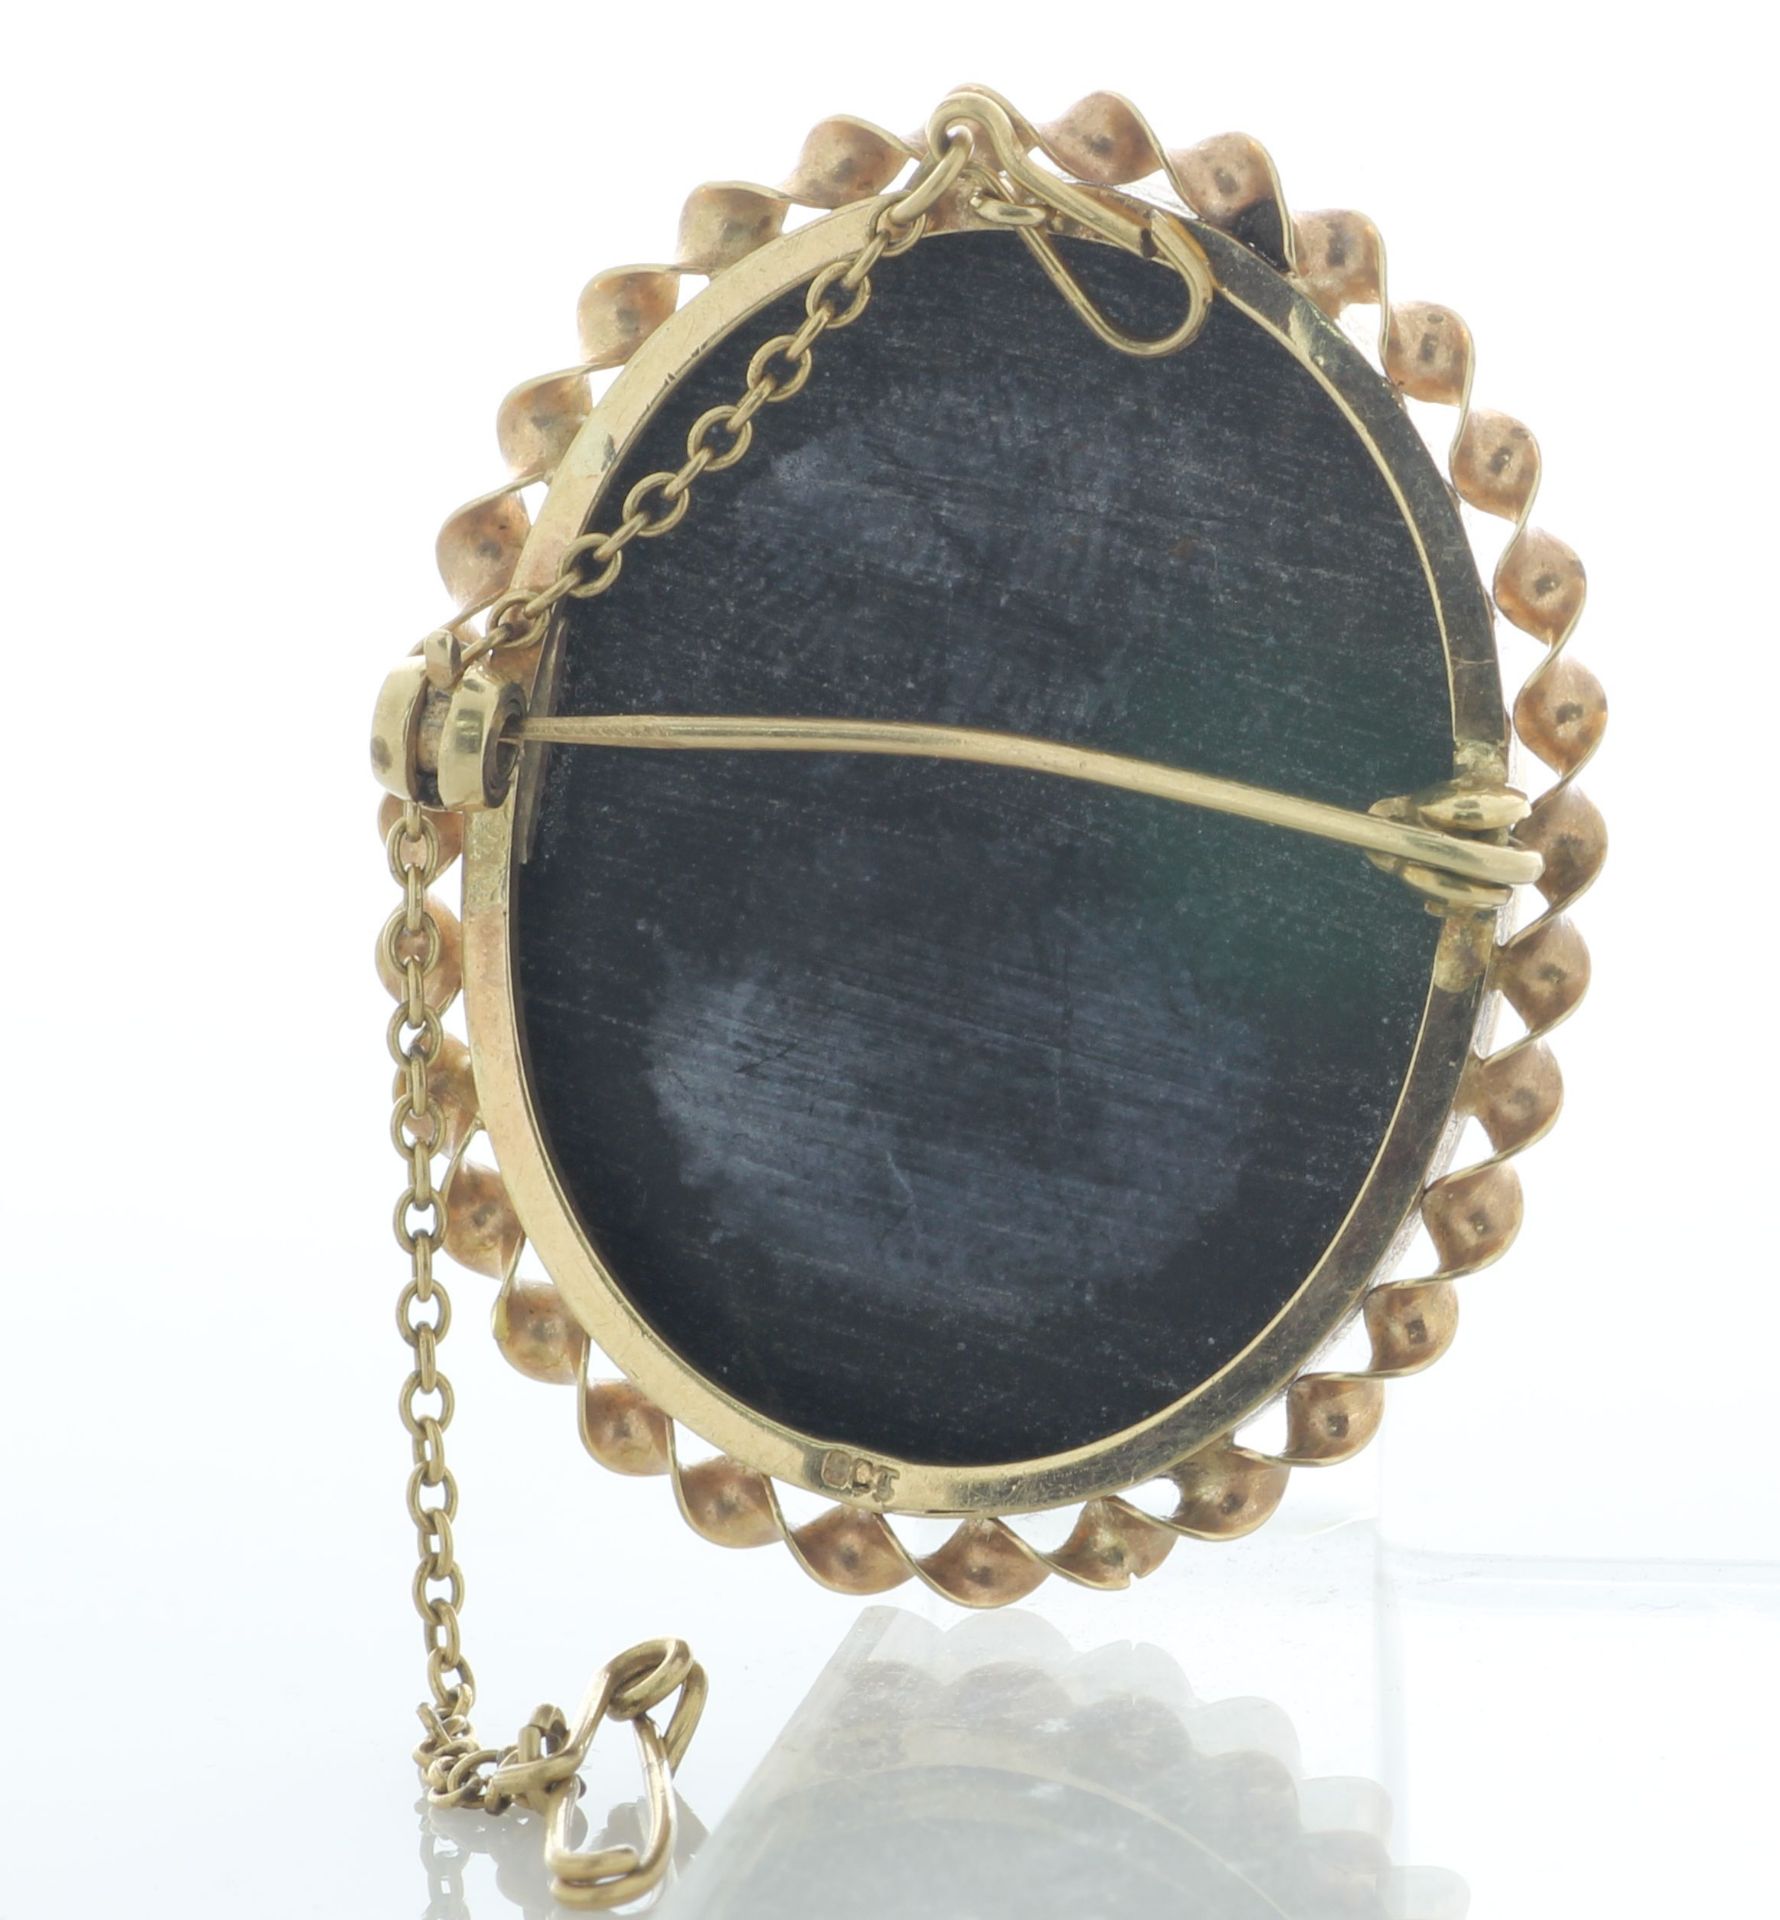 10ct yellow Gold Onyx Cameo Brooch - Valued By AGI £4,995.00 - 10c yellow gold cameo brooch, - Image 3 of 4